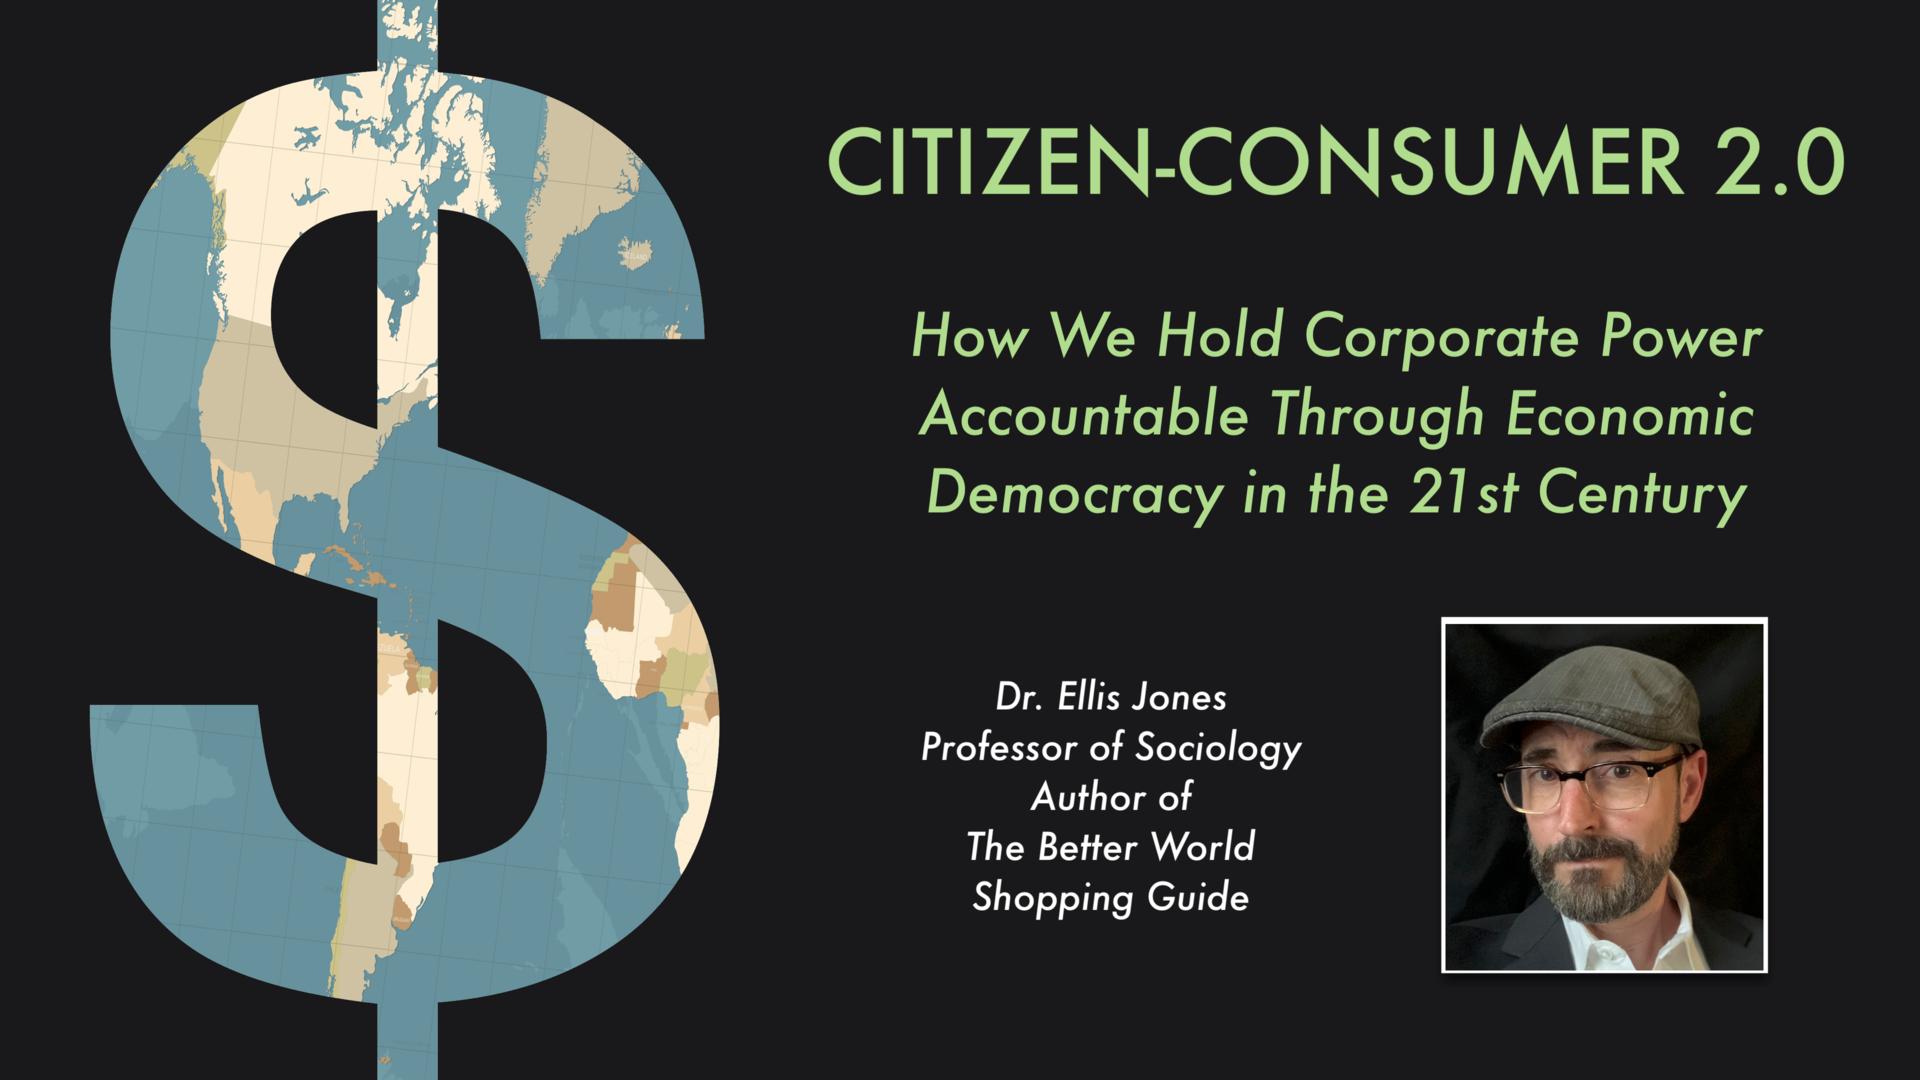 Green Bag Lunch & Learn - Citizen-Consumer 2.0: How We Hold Corporate Power Accountable Through Economic Democracy in the 21st Century (recorded livestream)